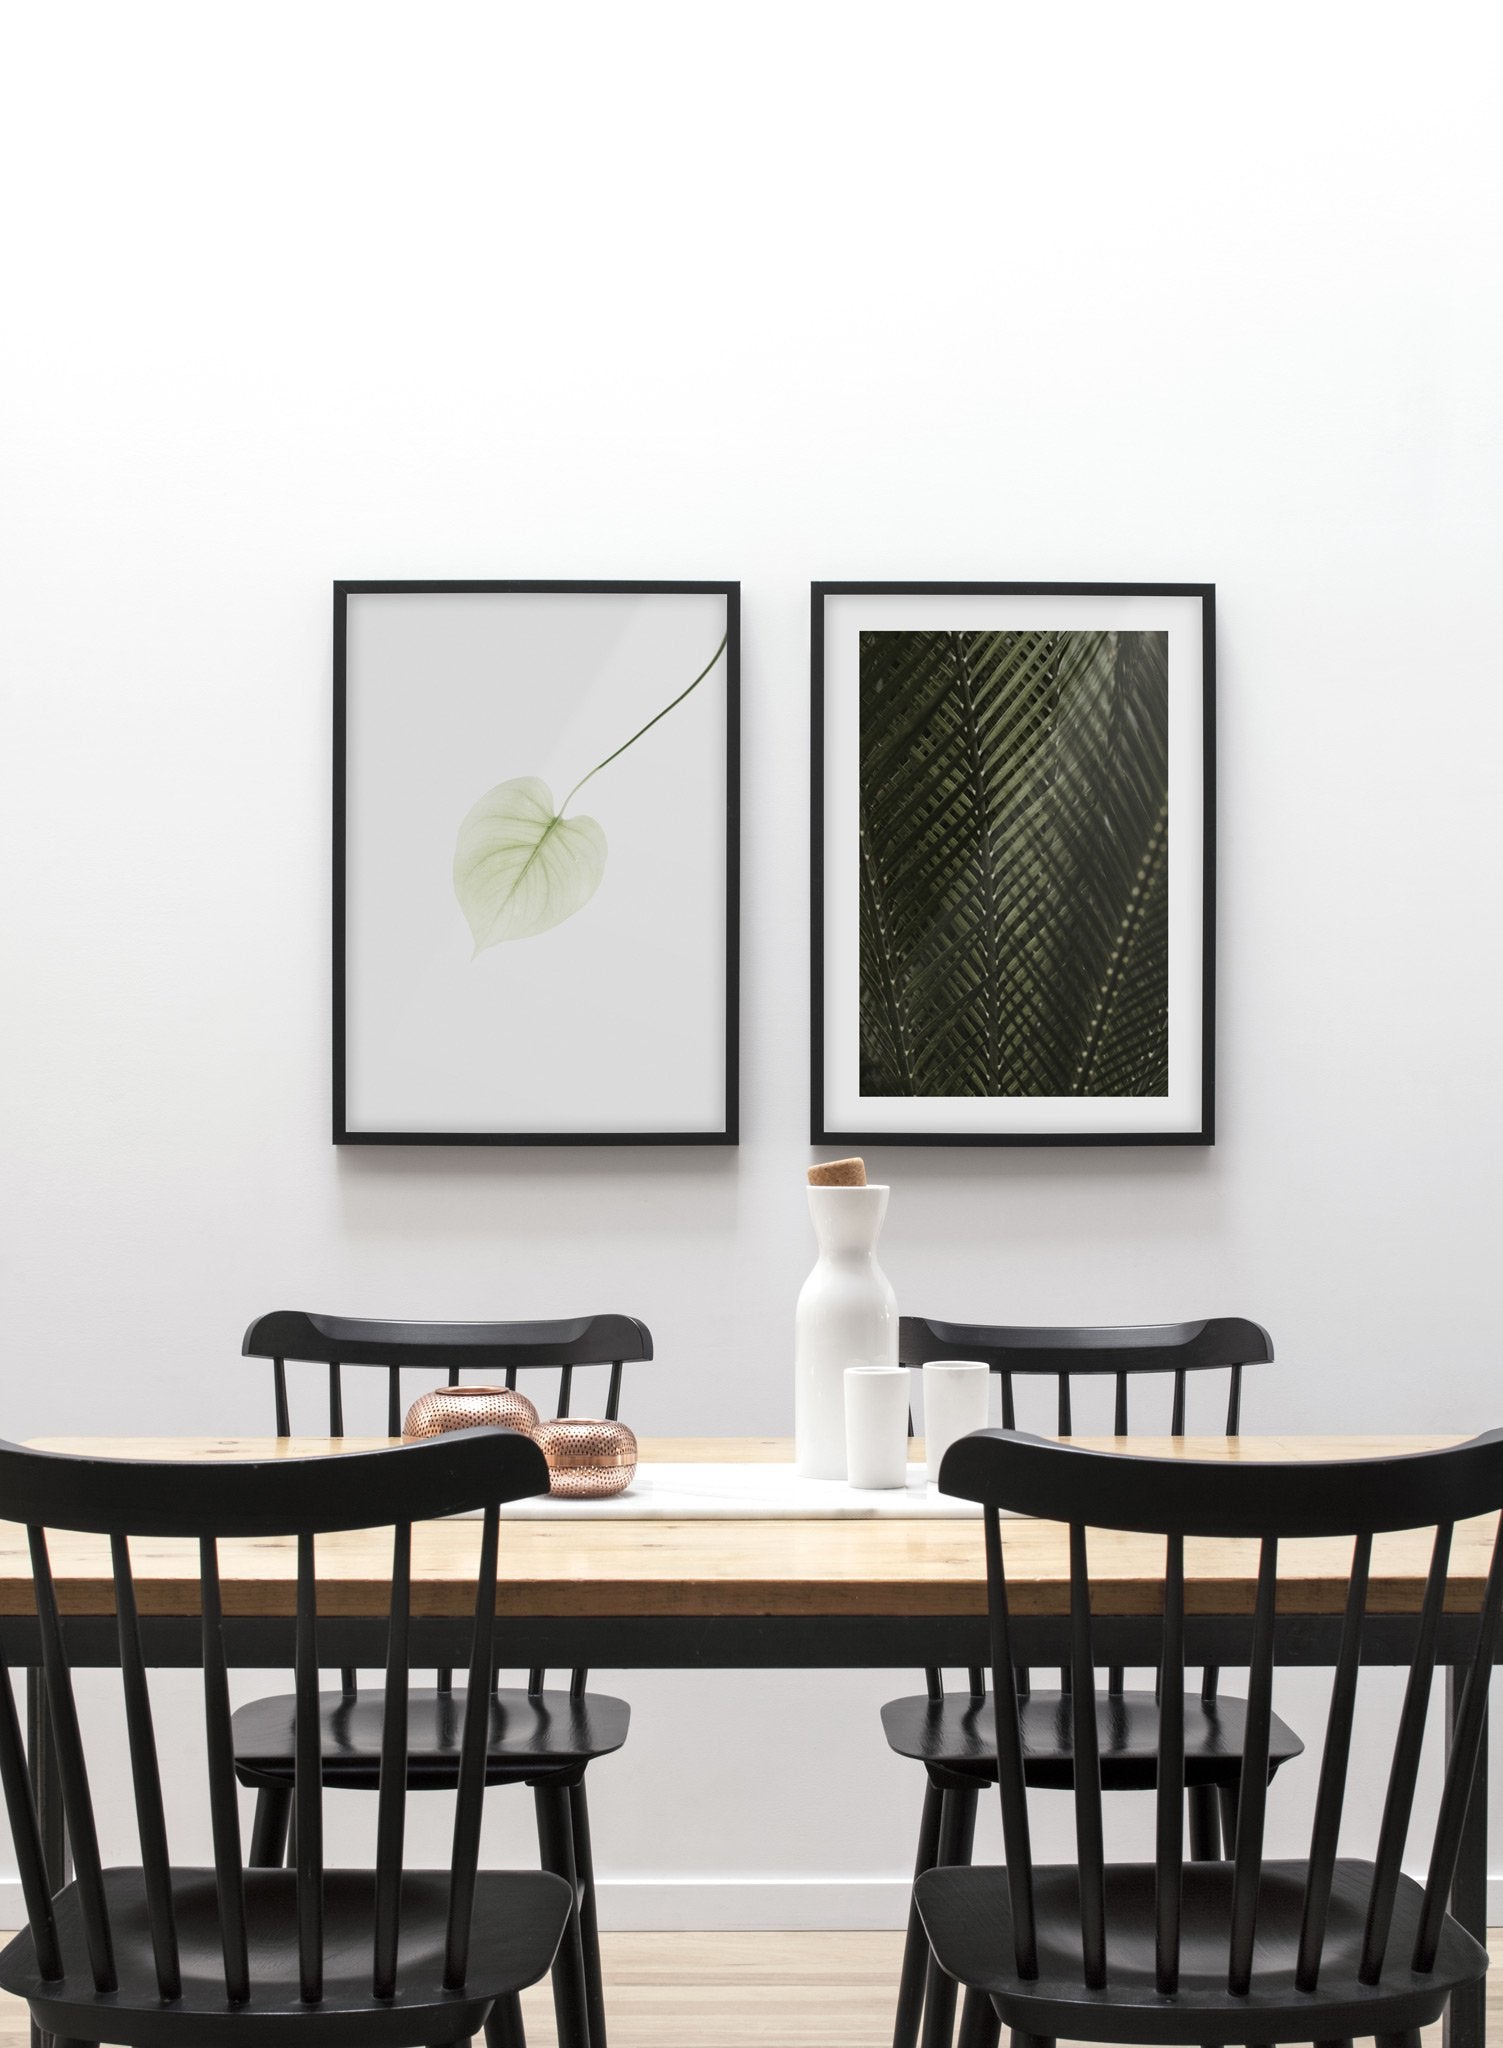 Shadowy Fern modern minimalist botanical photography poster by Opposite Wall - Dining room with gallery wall duo